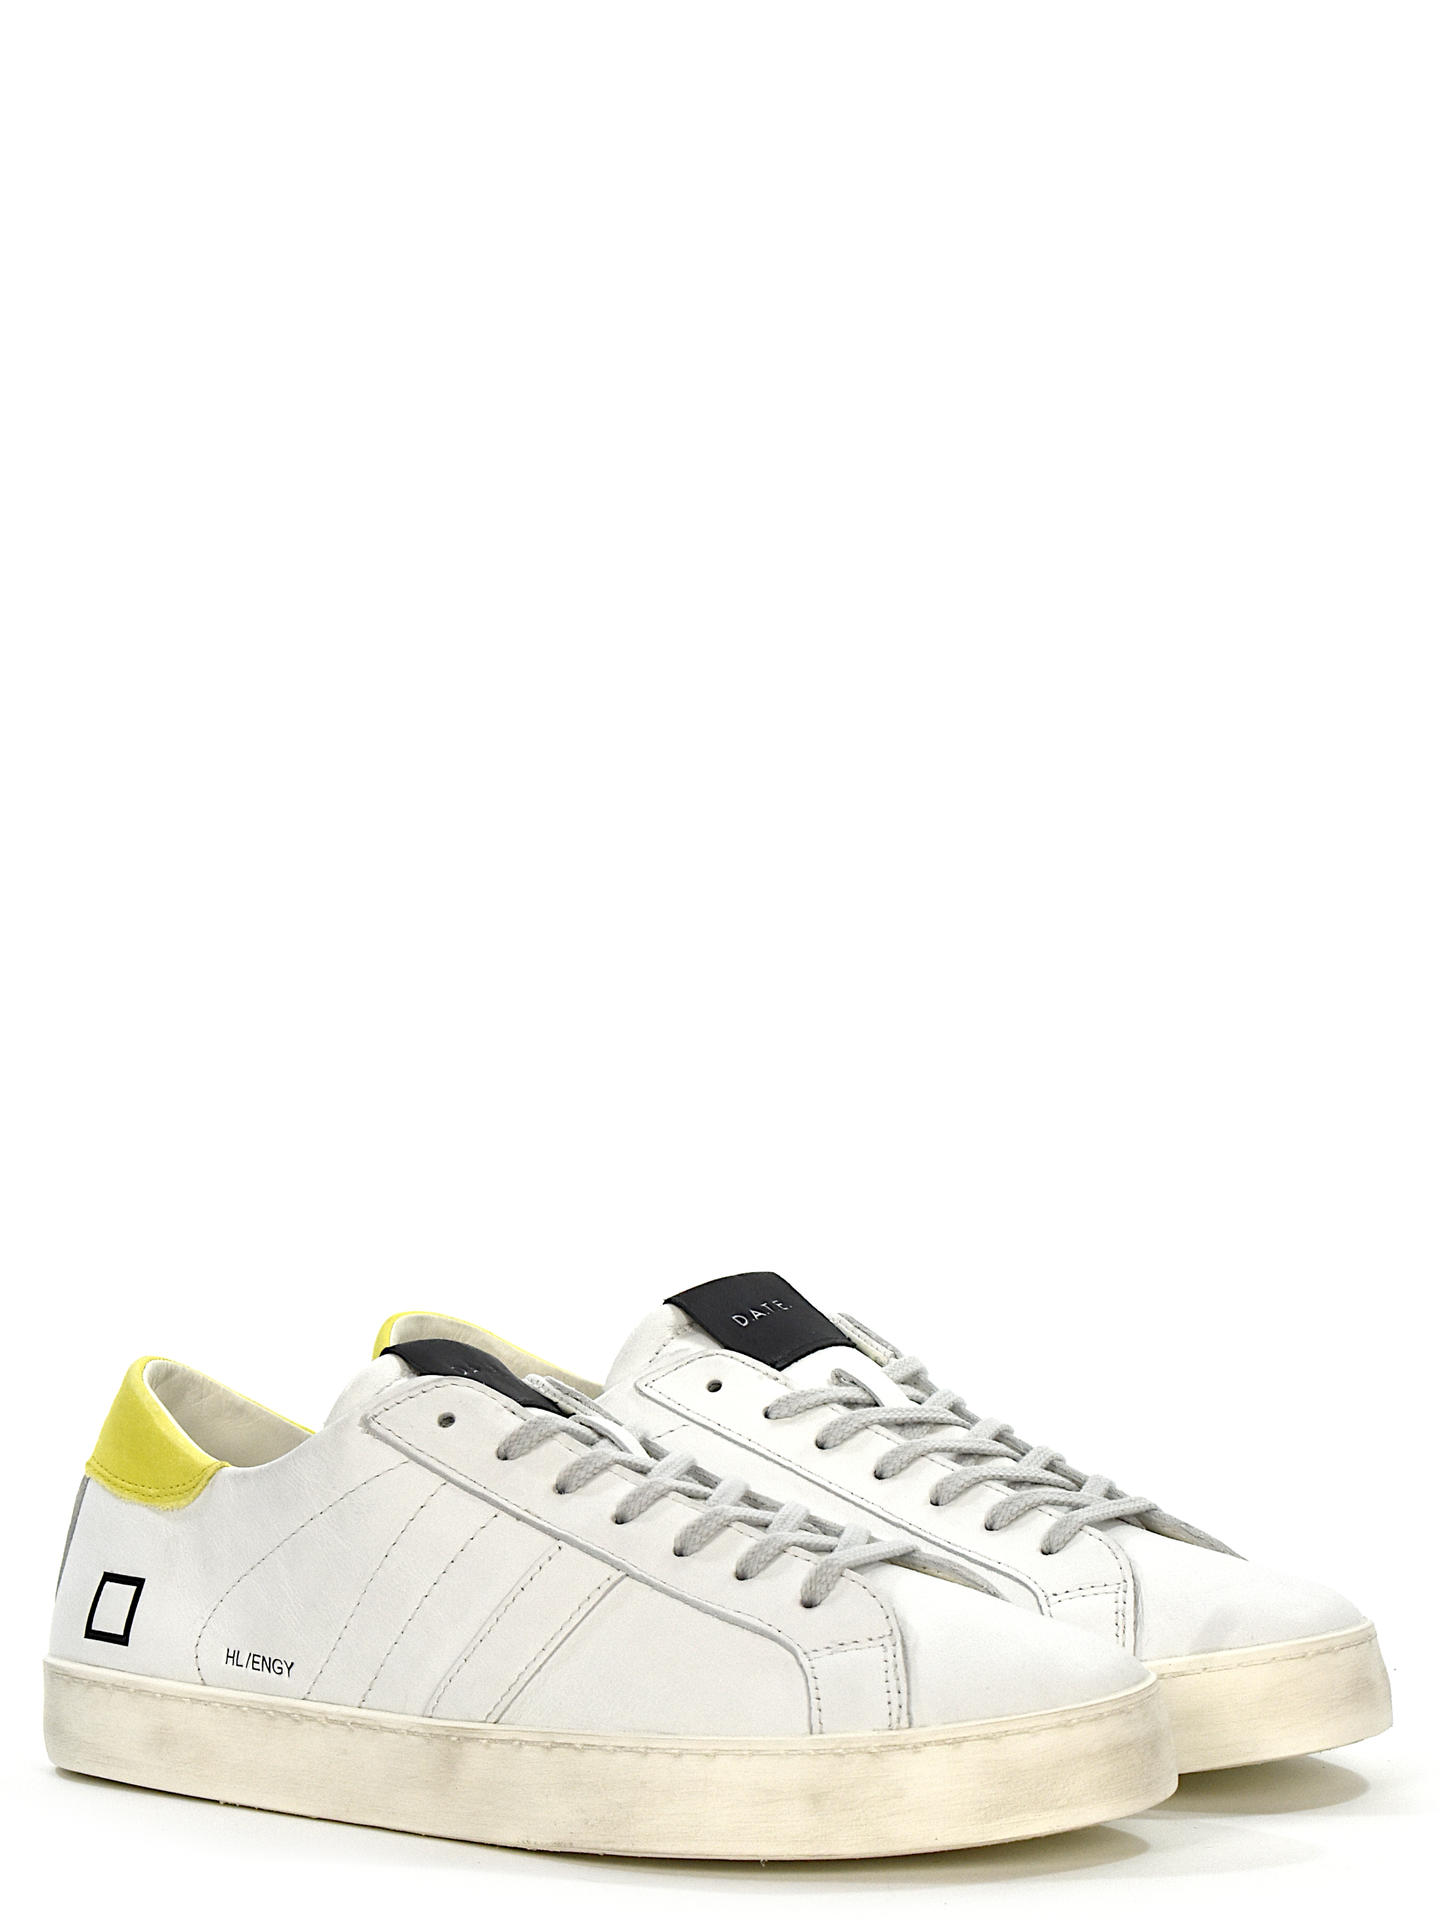 SNEAKERS D.A.T.E HLENHY BIANCO/GIALLO